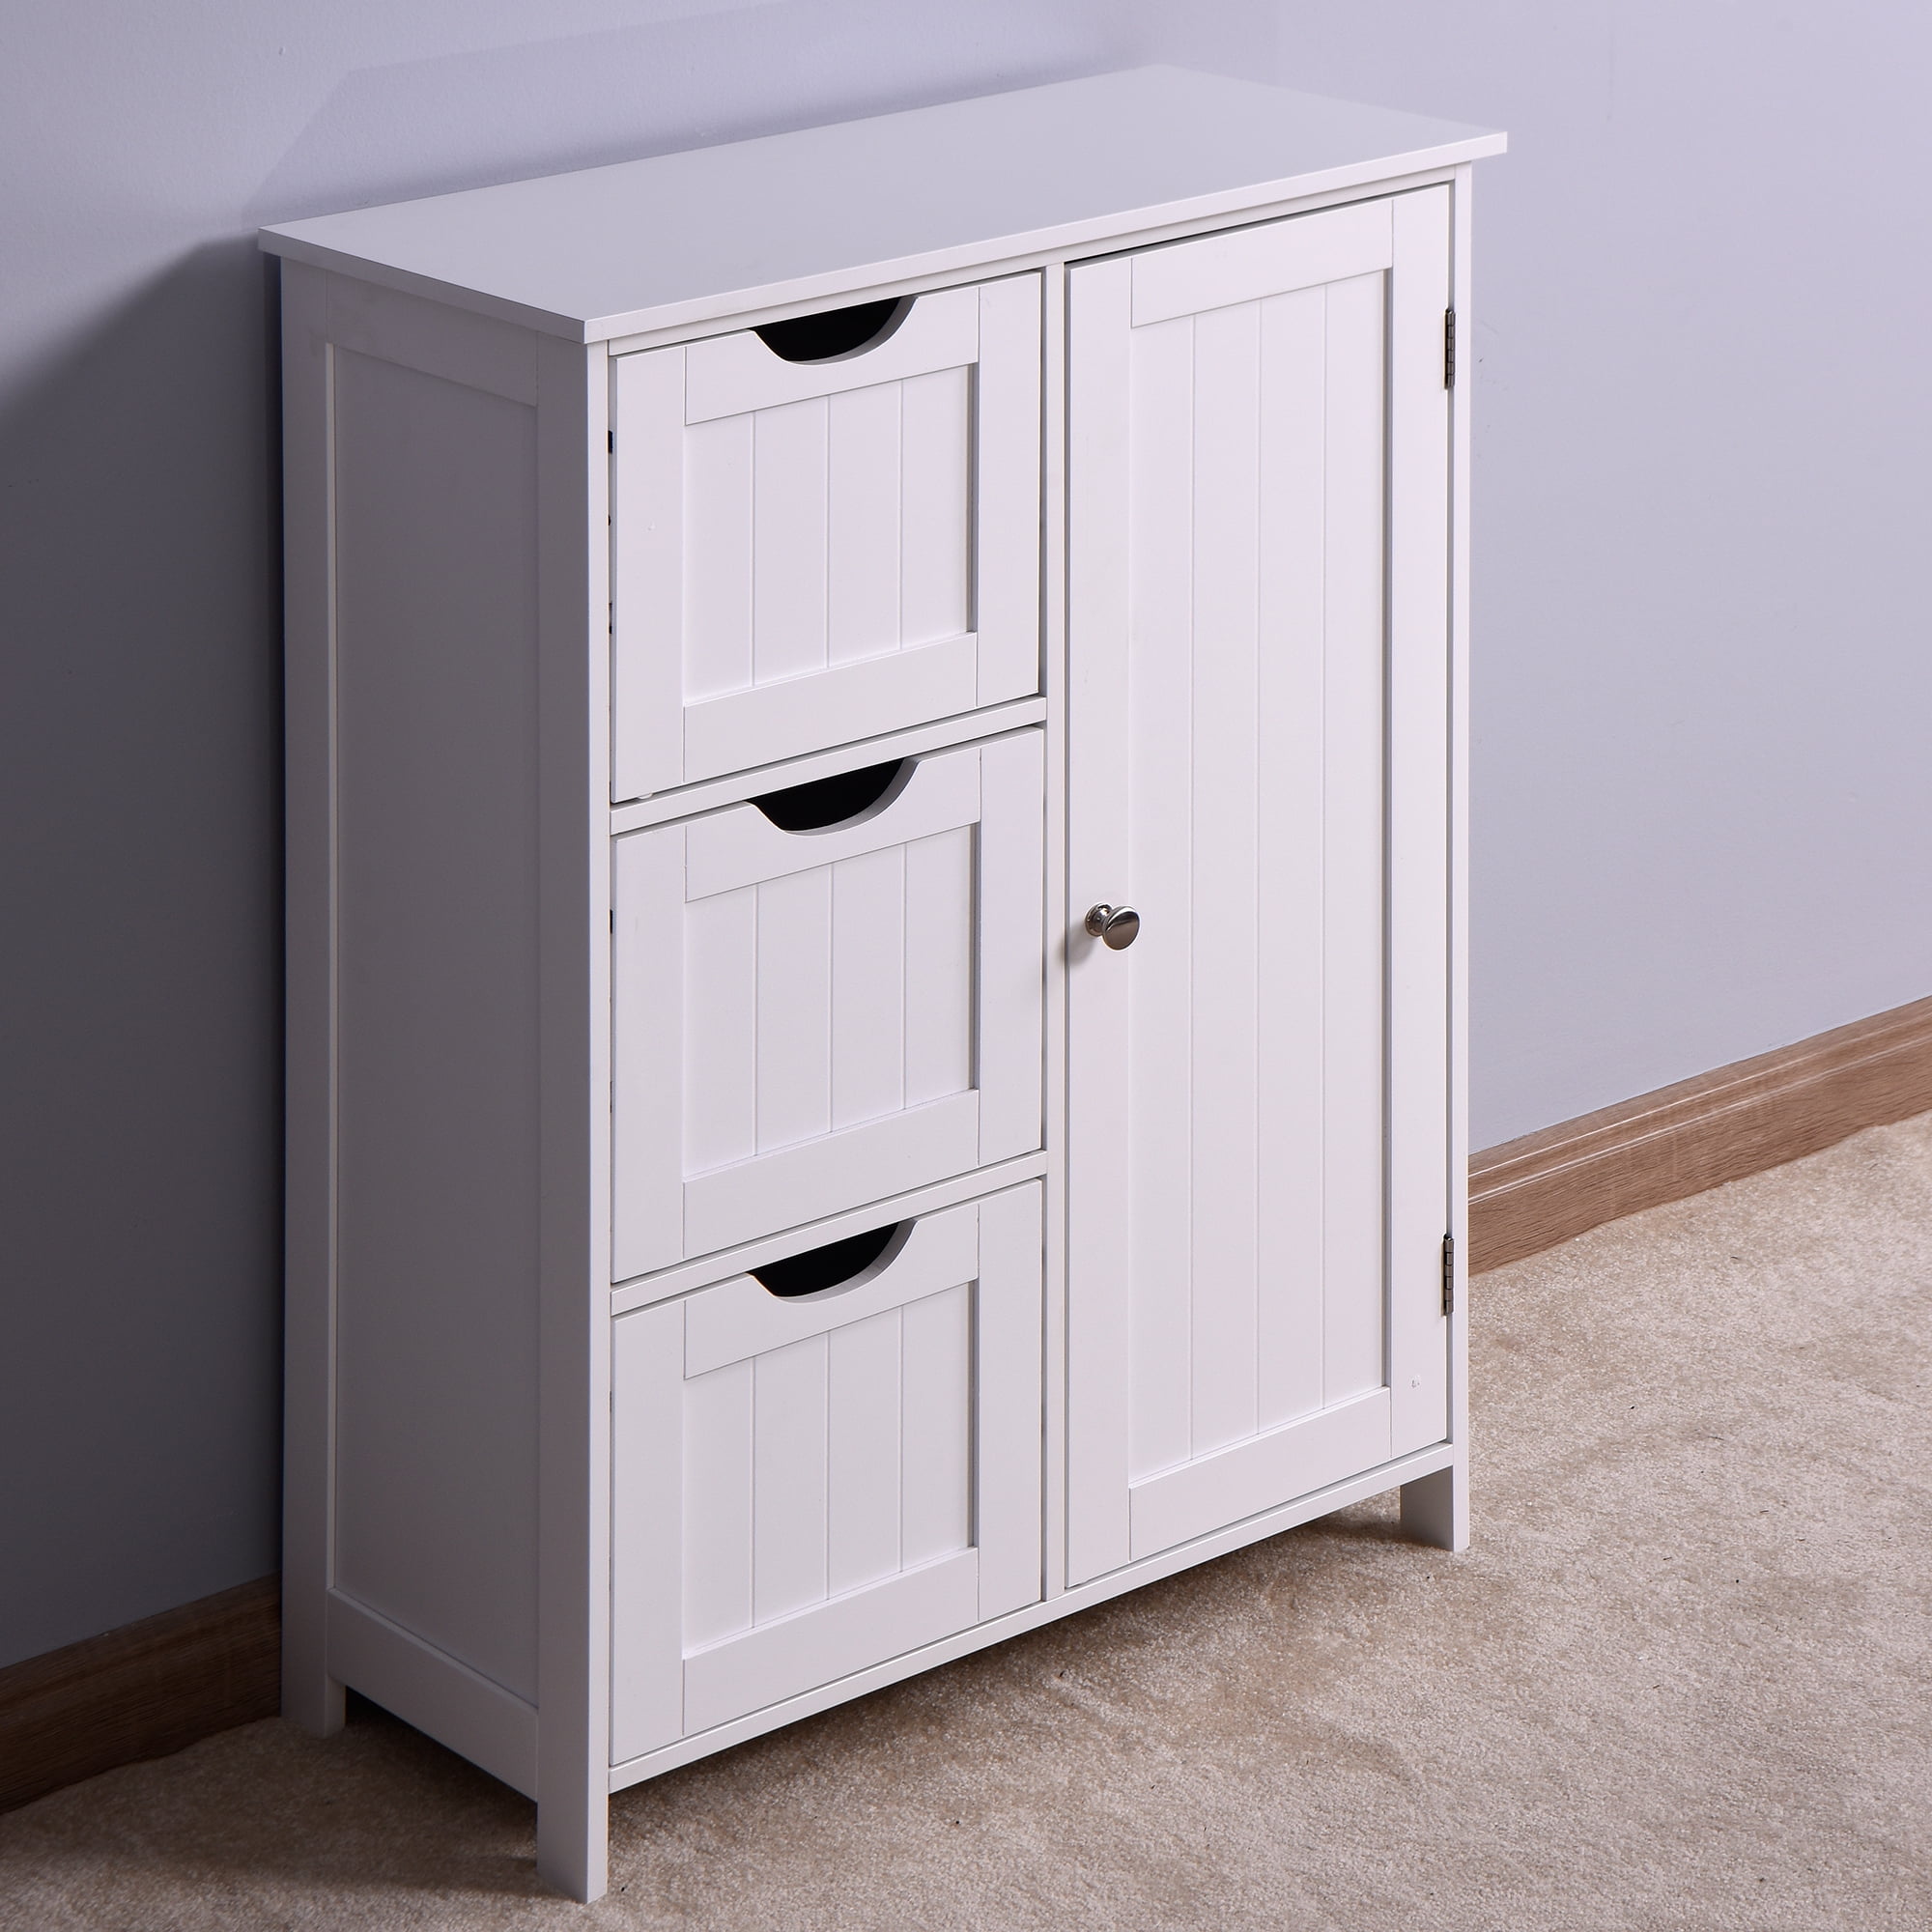 Bathroom,Livingroom and Office Modern Free Standing Simple Locker Storage Cabinet Entryway Cabinet Sideboard Pantry Cabinet with 1 Door 3 Drawers for Kitchen Floor Cabinet